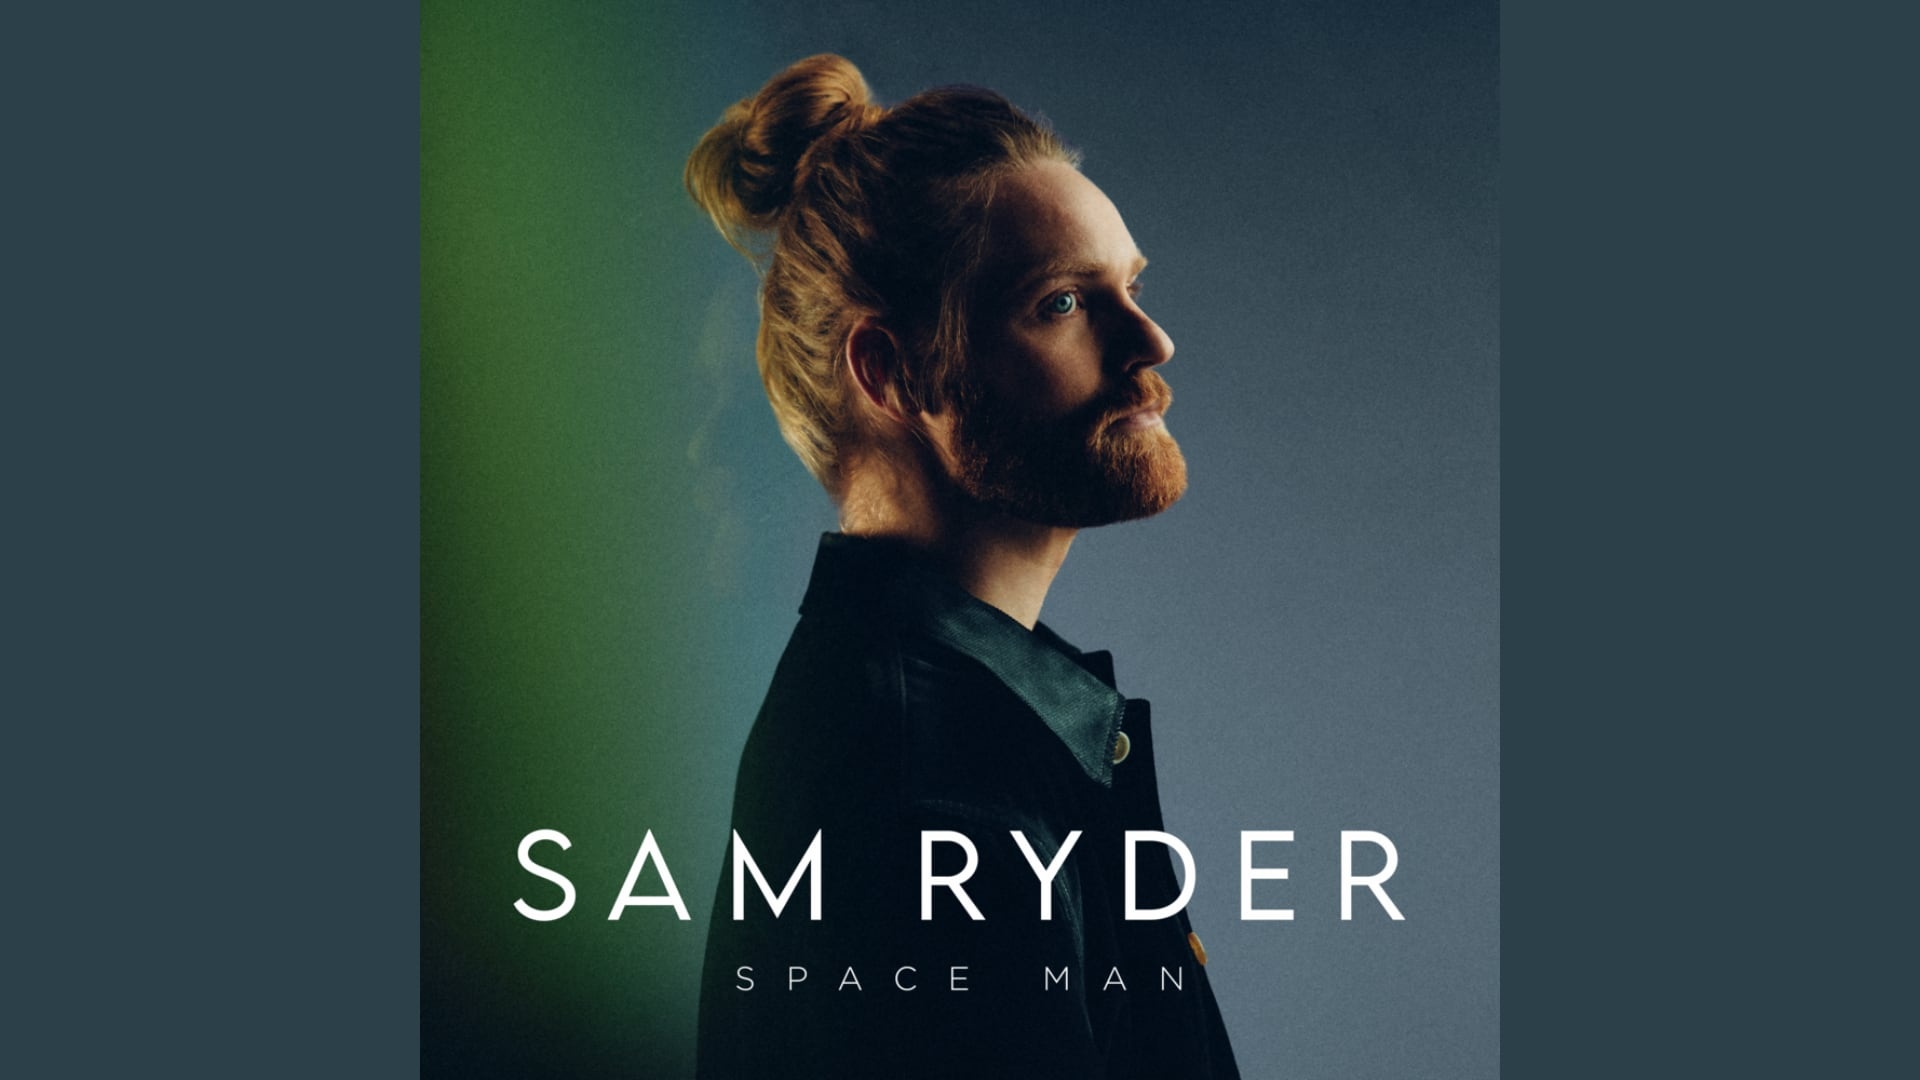 Sam Ryder: "Space Man" was released as a single on 22 February 2022. 1920x1080 Full HD Wallpaper.